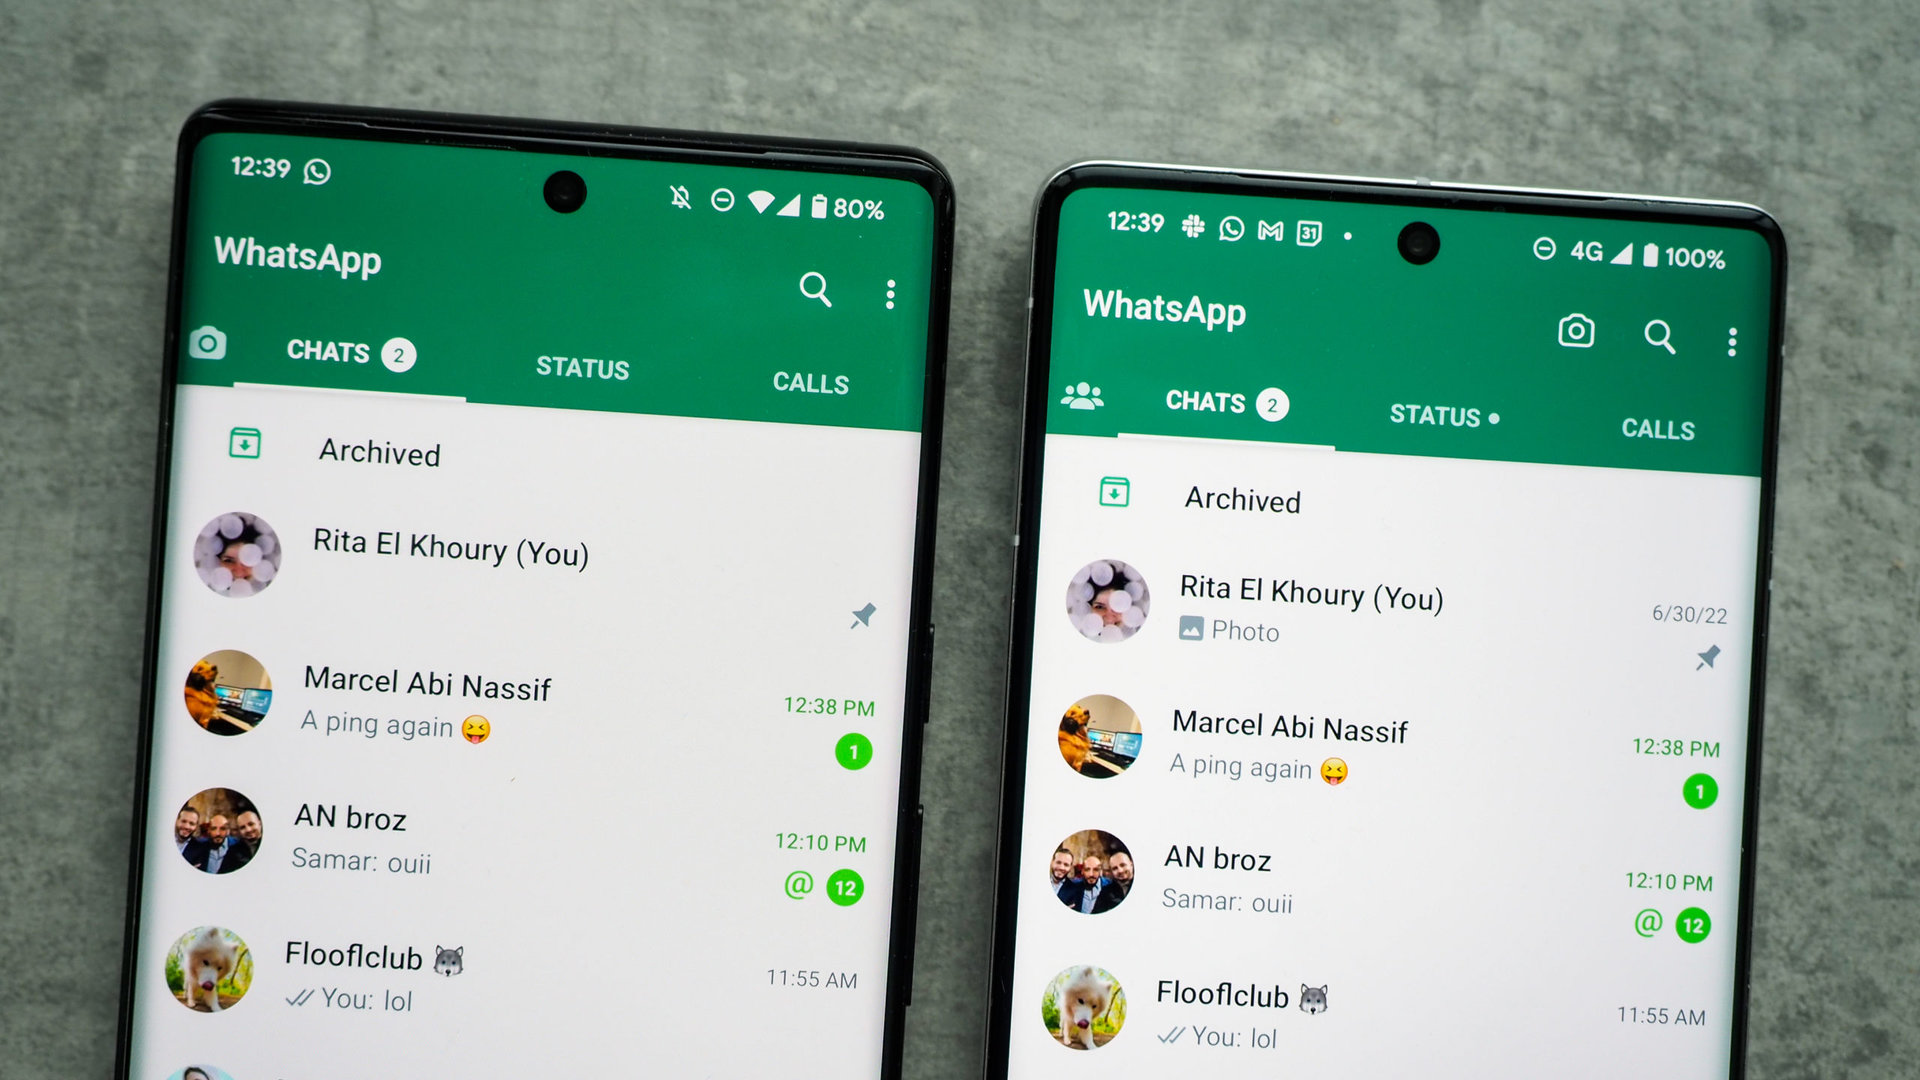 One whatsapp account running on two phones simultaneously